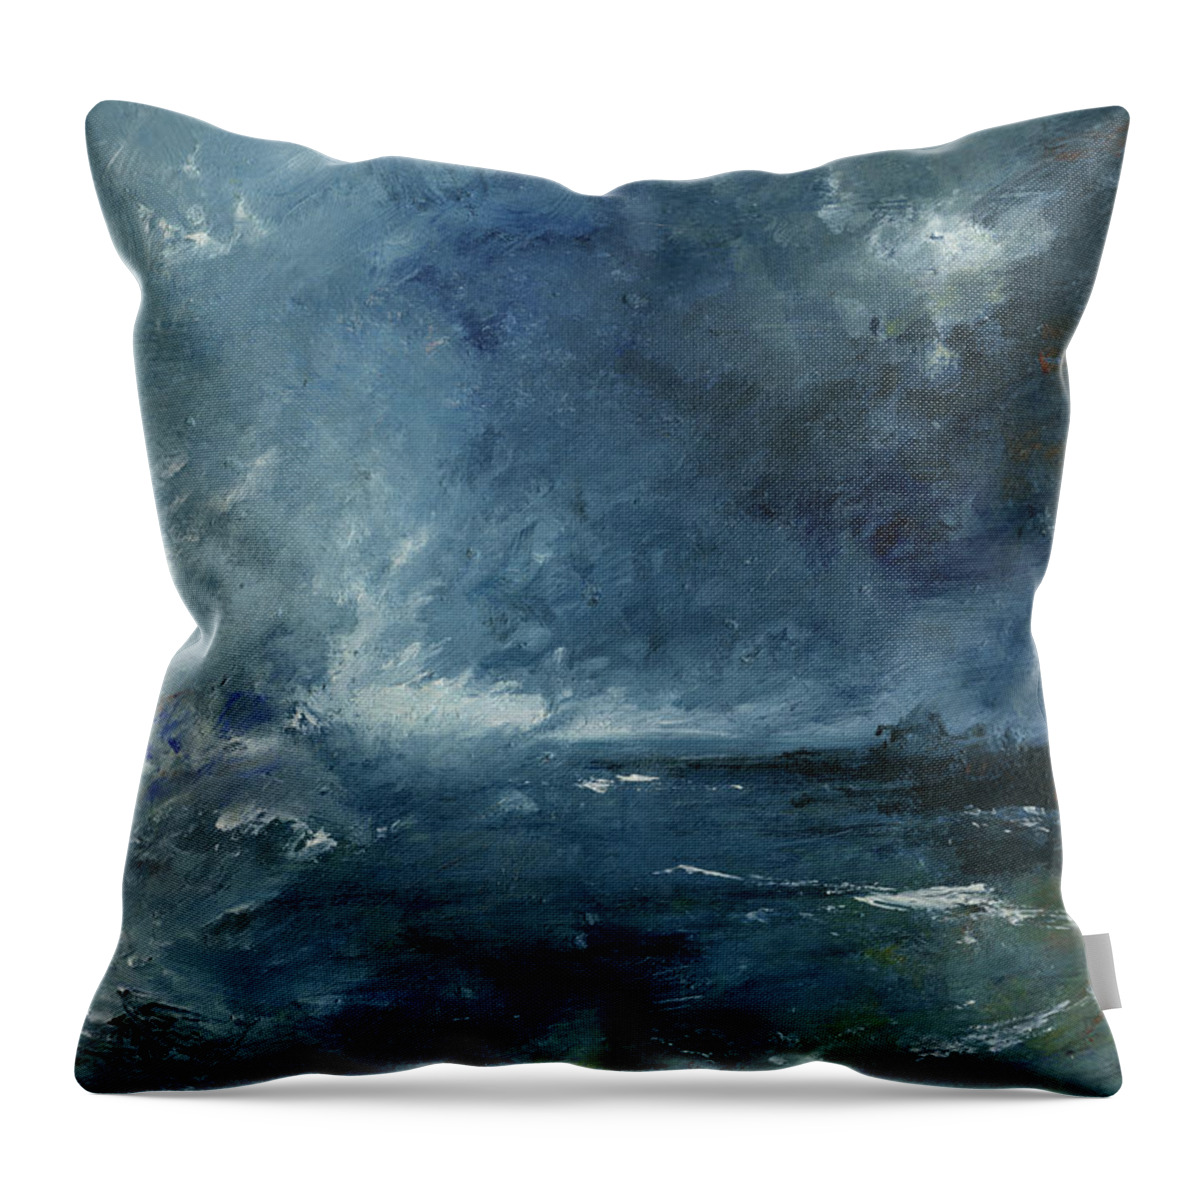 Abstract Seastorm Throw Pillow featuring the painting Seastorm by Juan Bosco